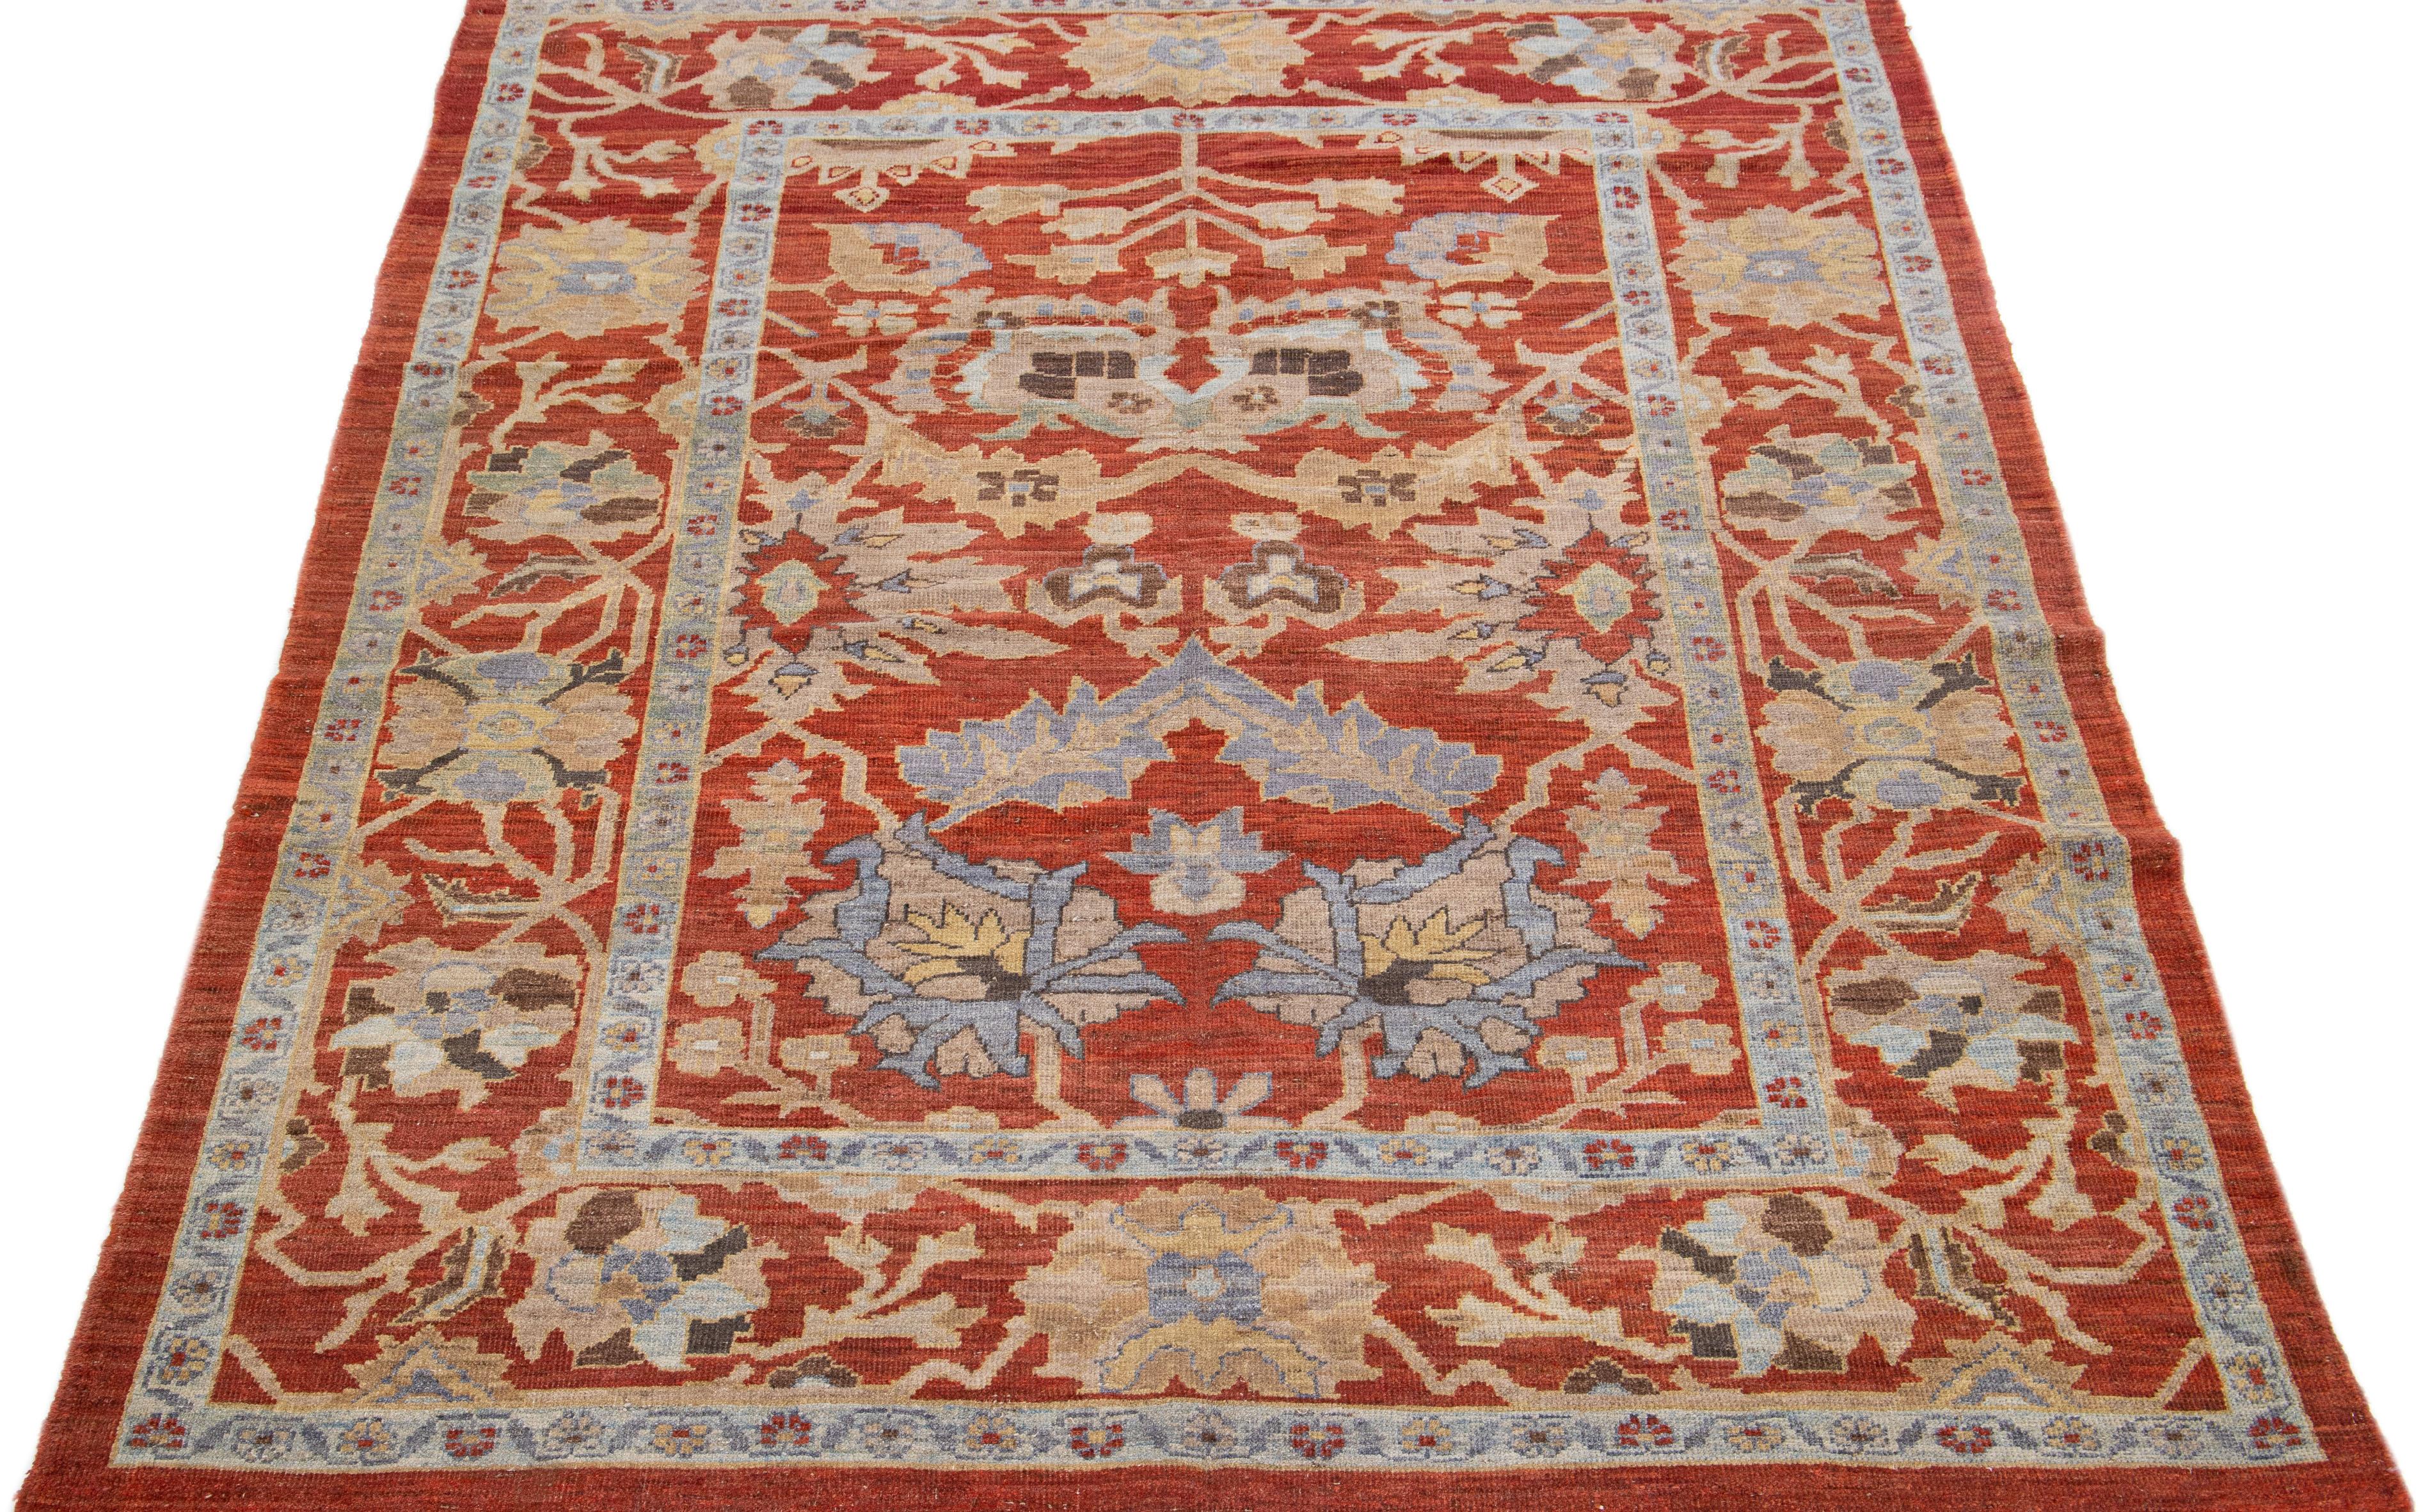 Beautiful modern Sultanabad hand-knotted wool rug with a rust color field. This rug has a designed frame with tan, gray, and brown accents in a gorgeous all-over floral design.

This rug measures: 6'6